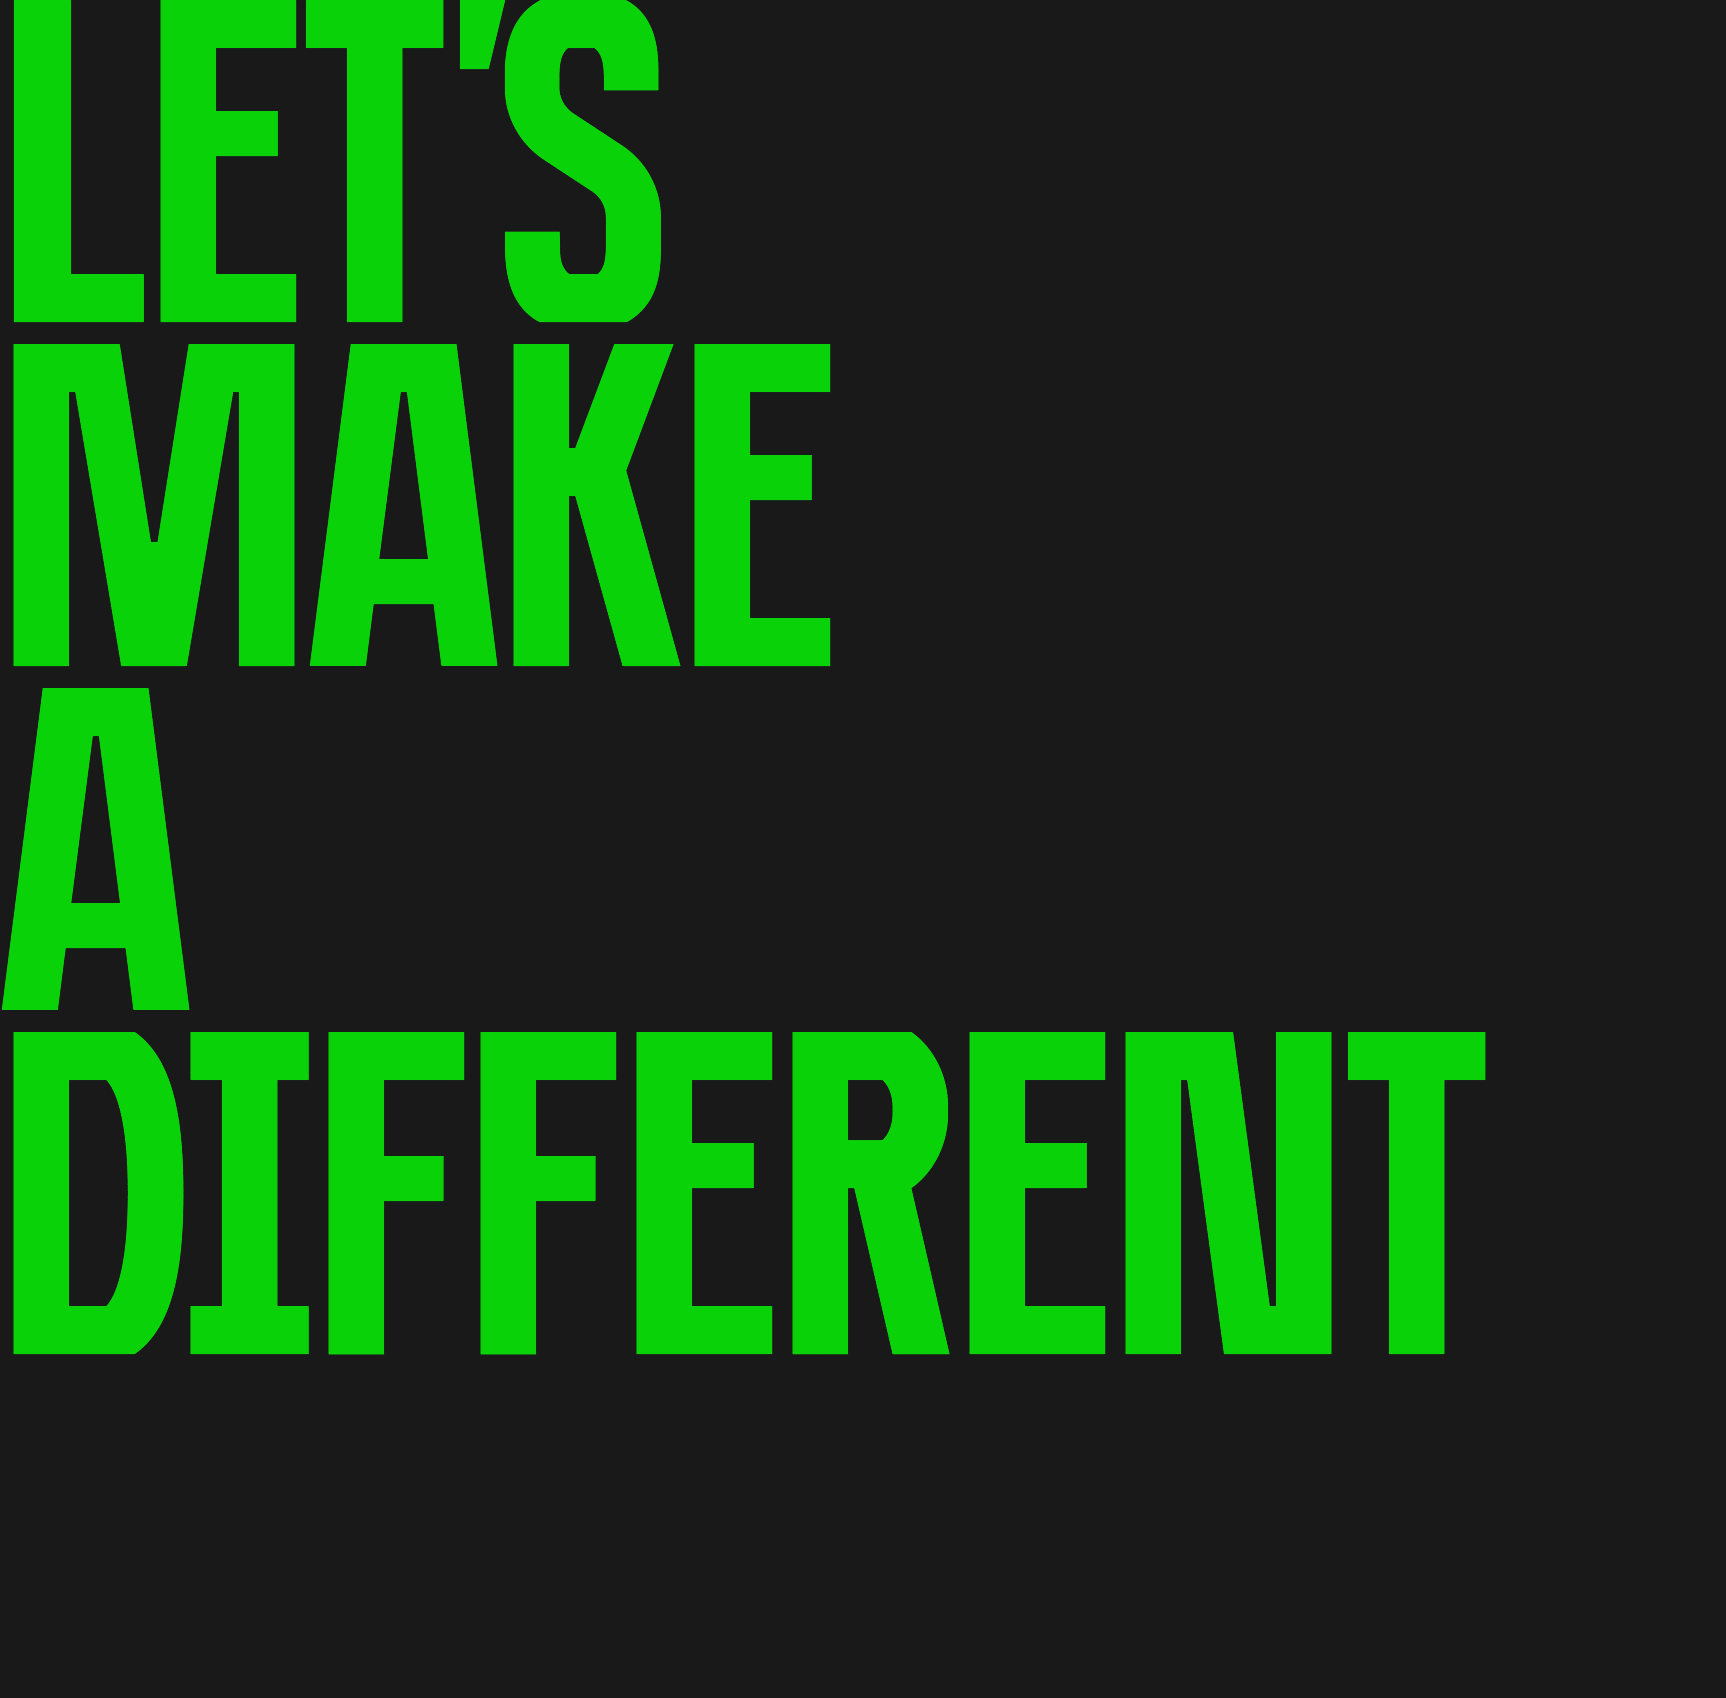 Let's Make a Different™